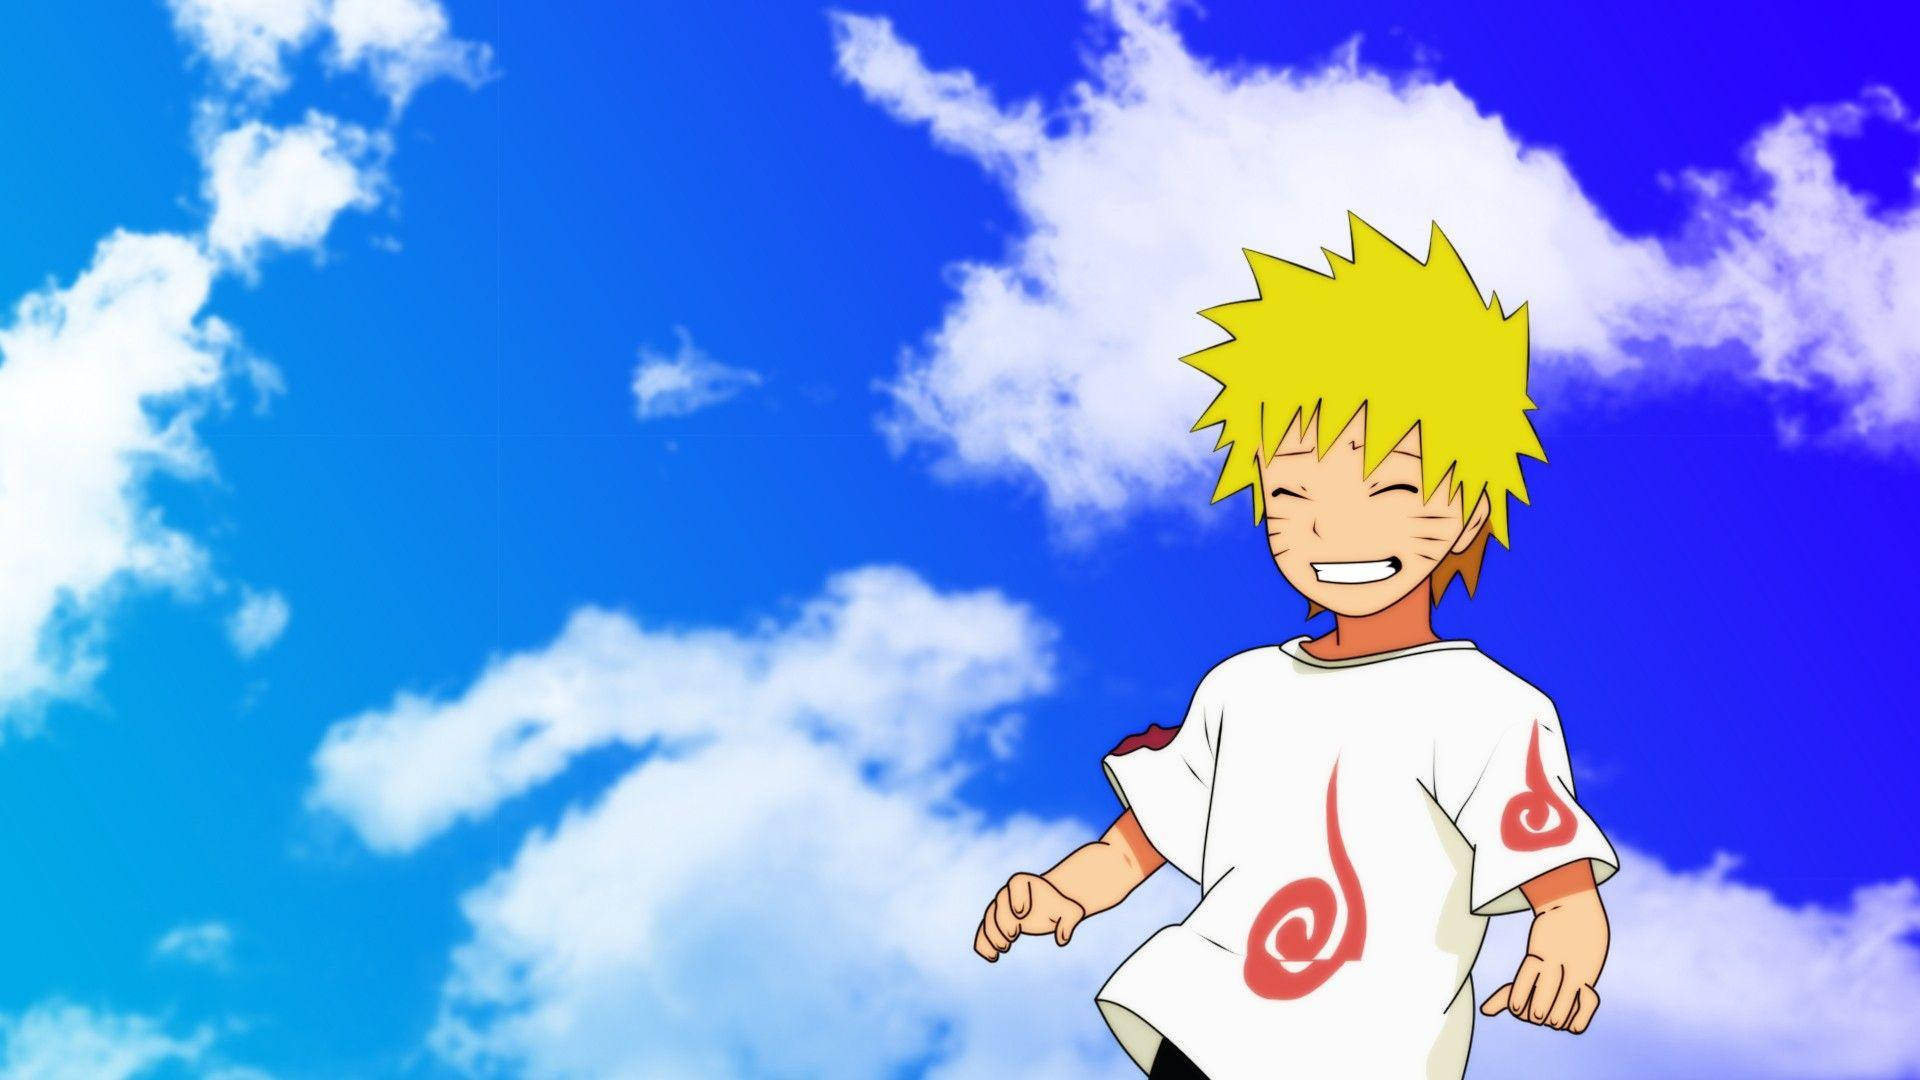 Naruto Pfp With Cloudy Blue Sky Wallpaper